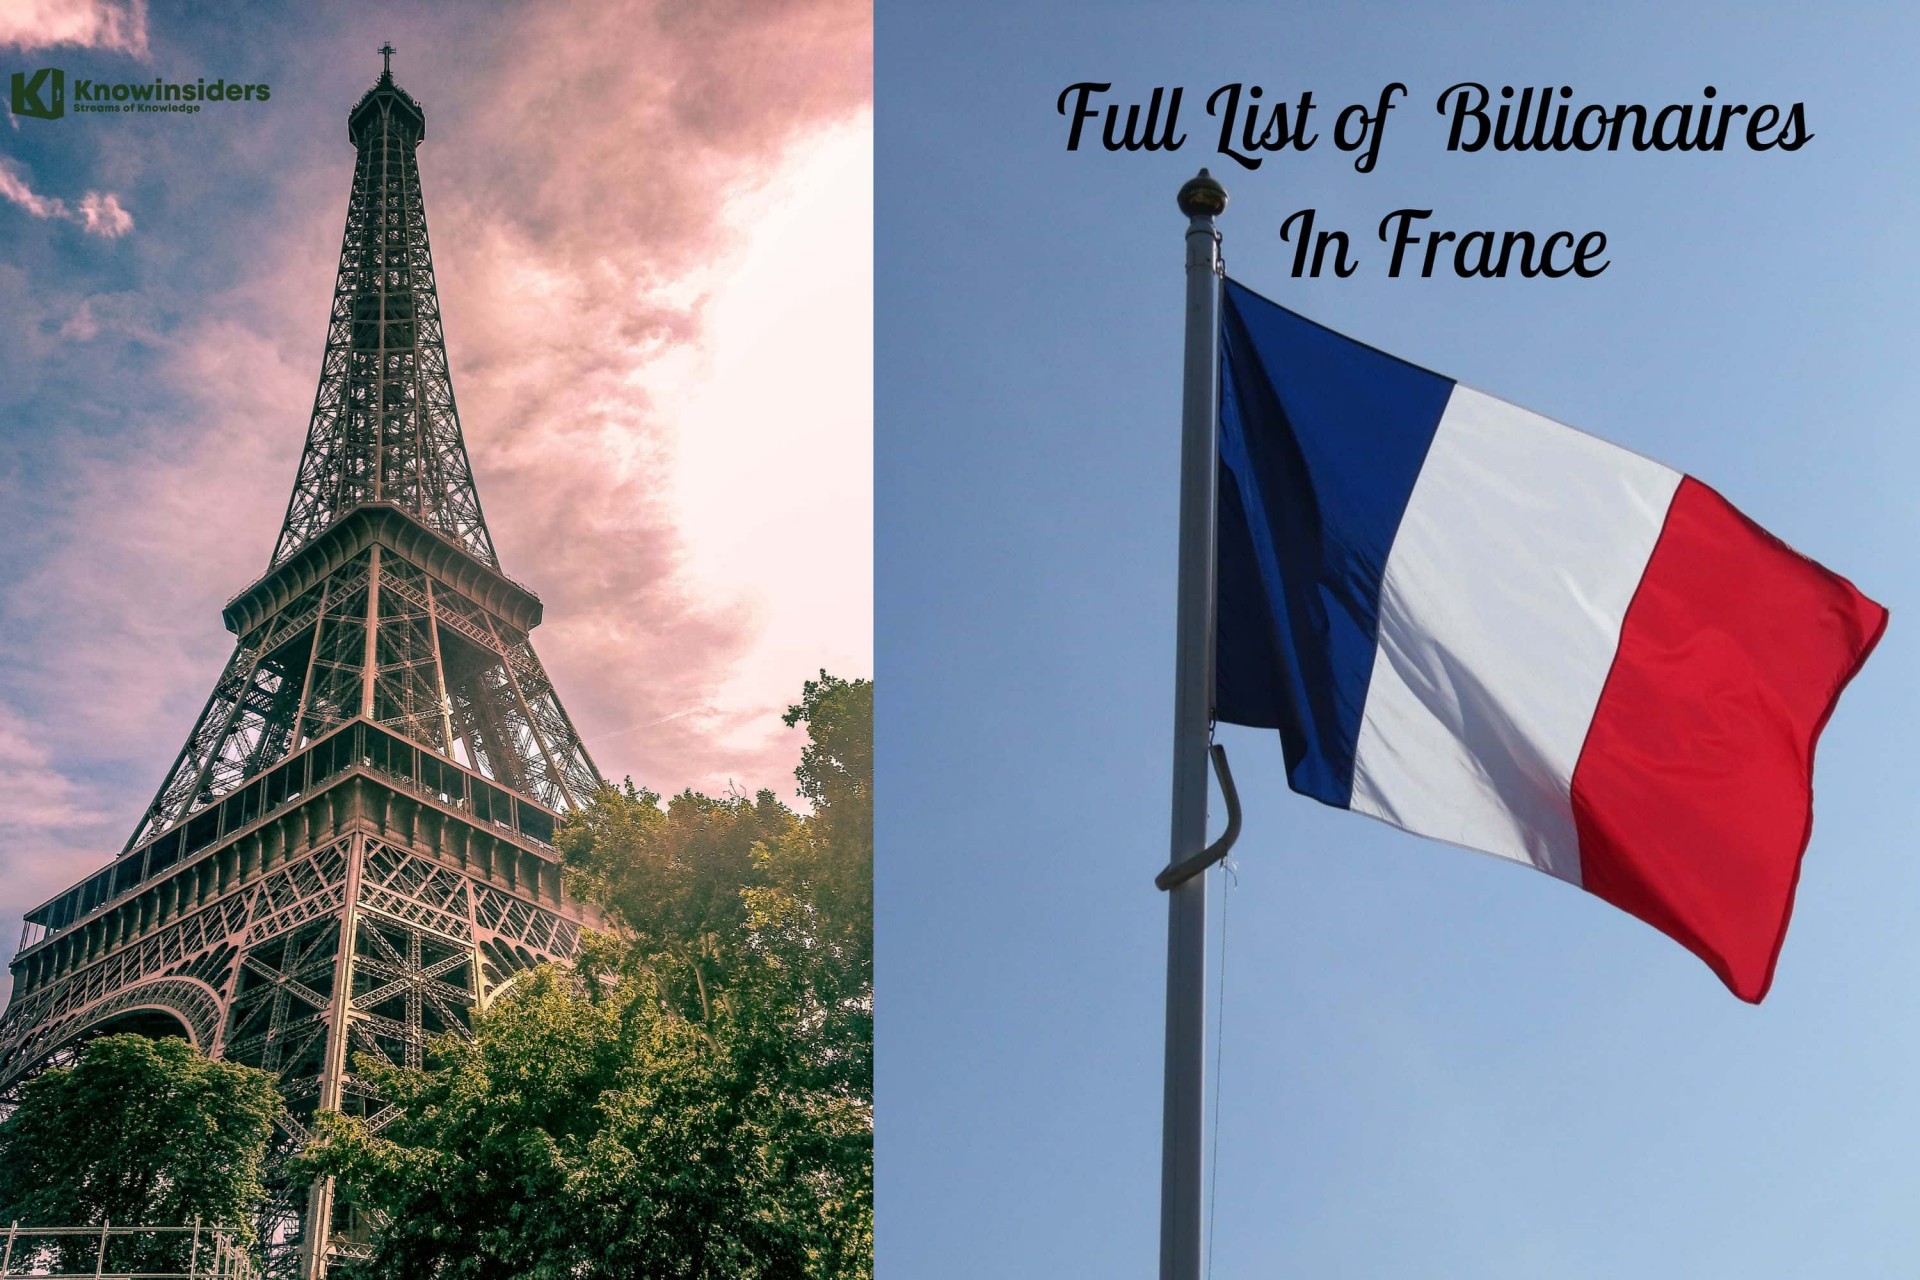 Full List of French Billionaires - Who Are The Richest People In France?